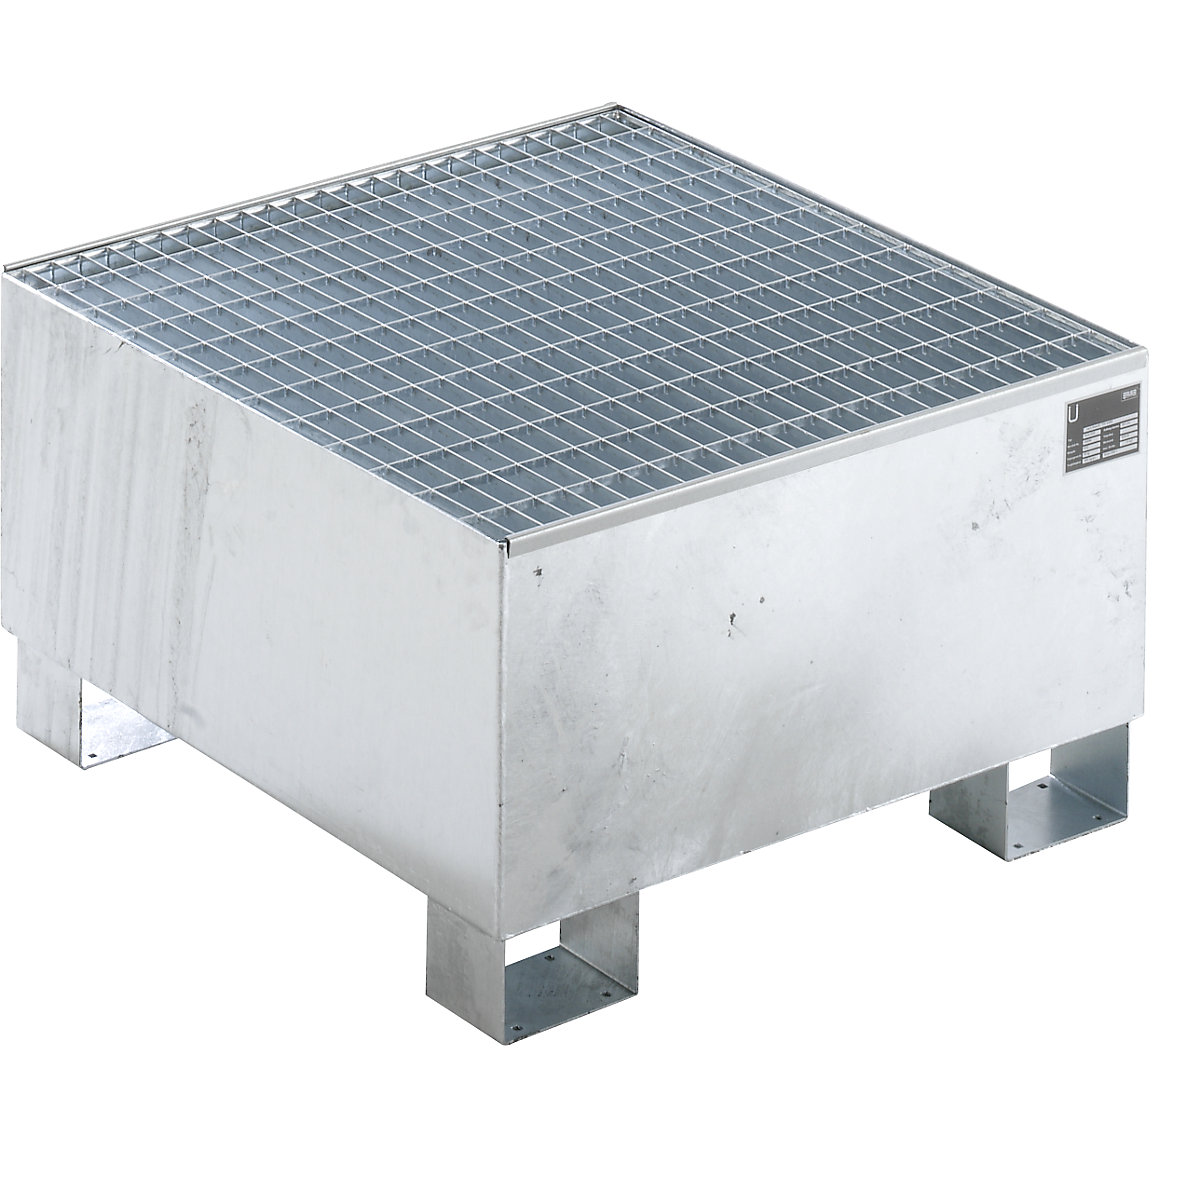 EUROKRAFTbasic – Sump tray made from sheet steel, LxWxH 800 x 800 x 465 mm, hot dip galvanised, with grate